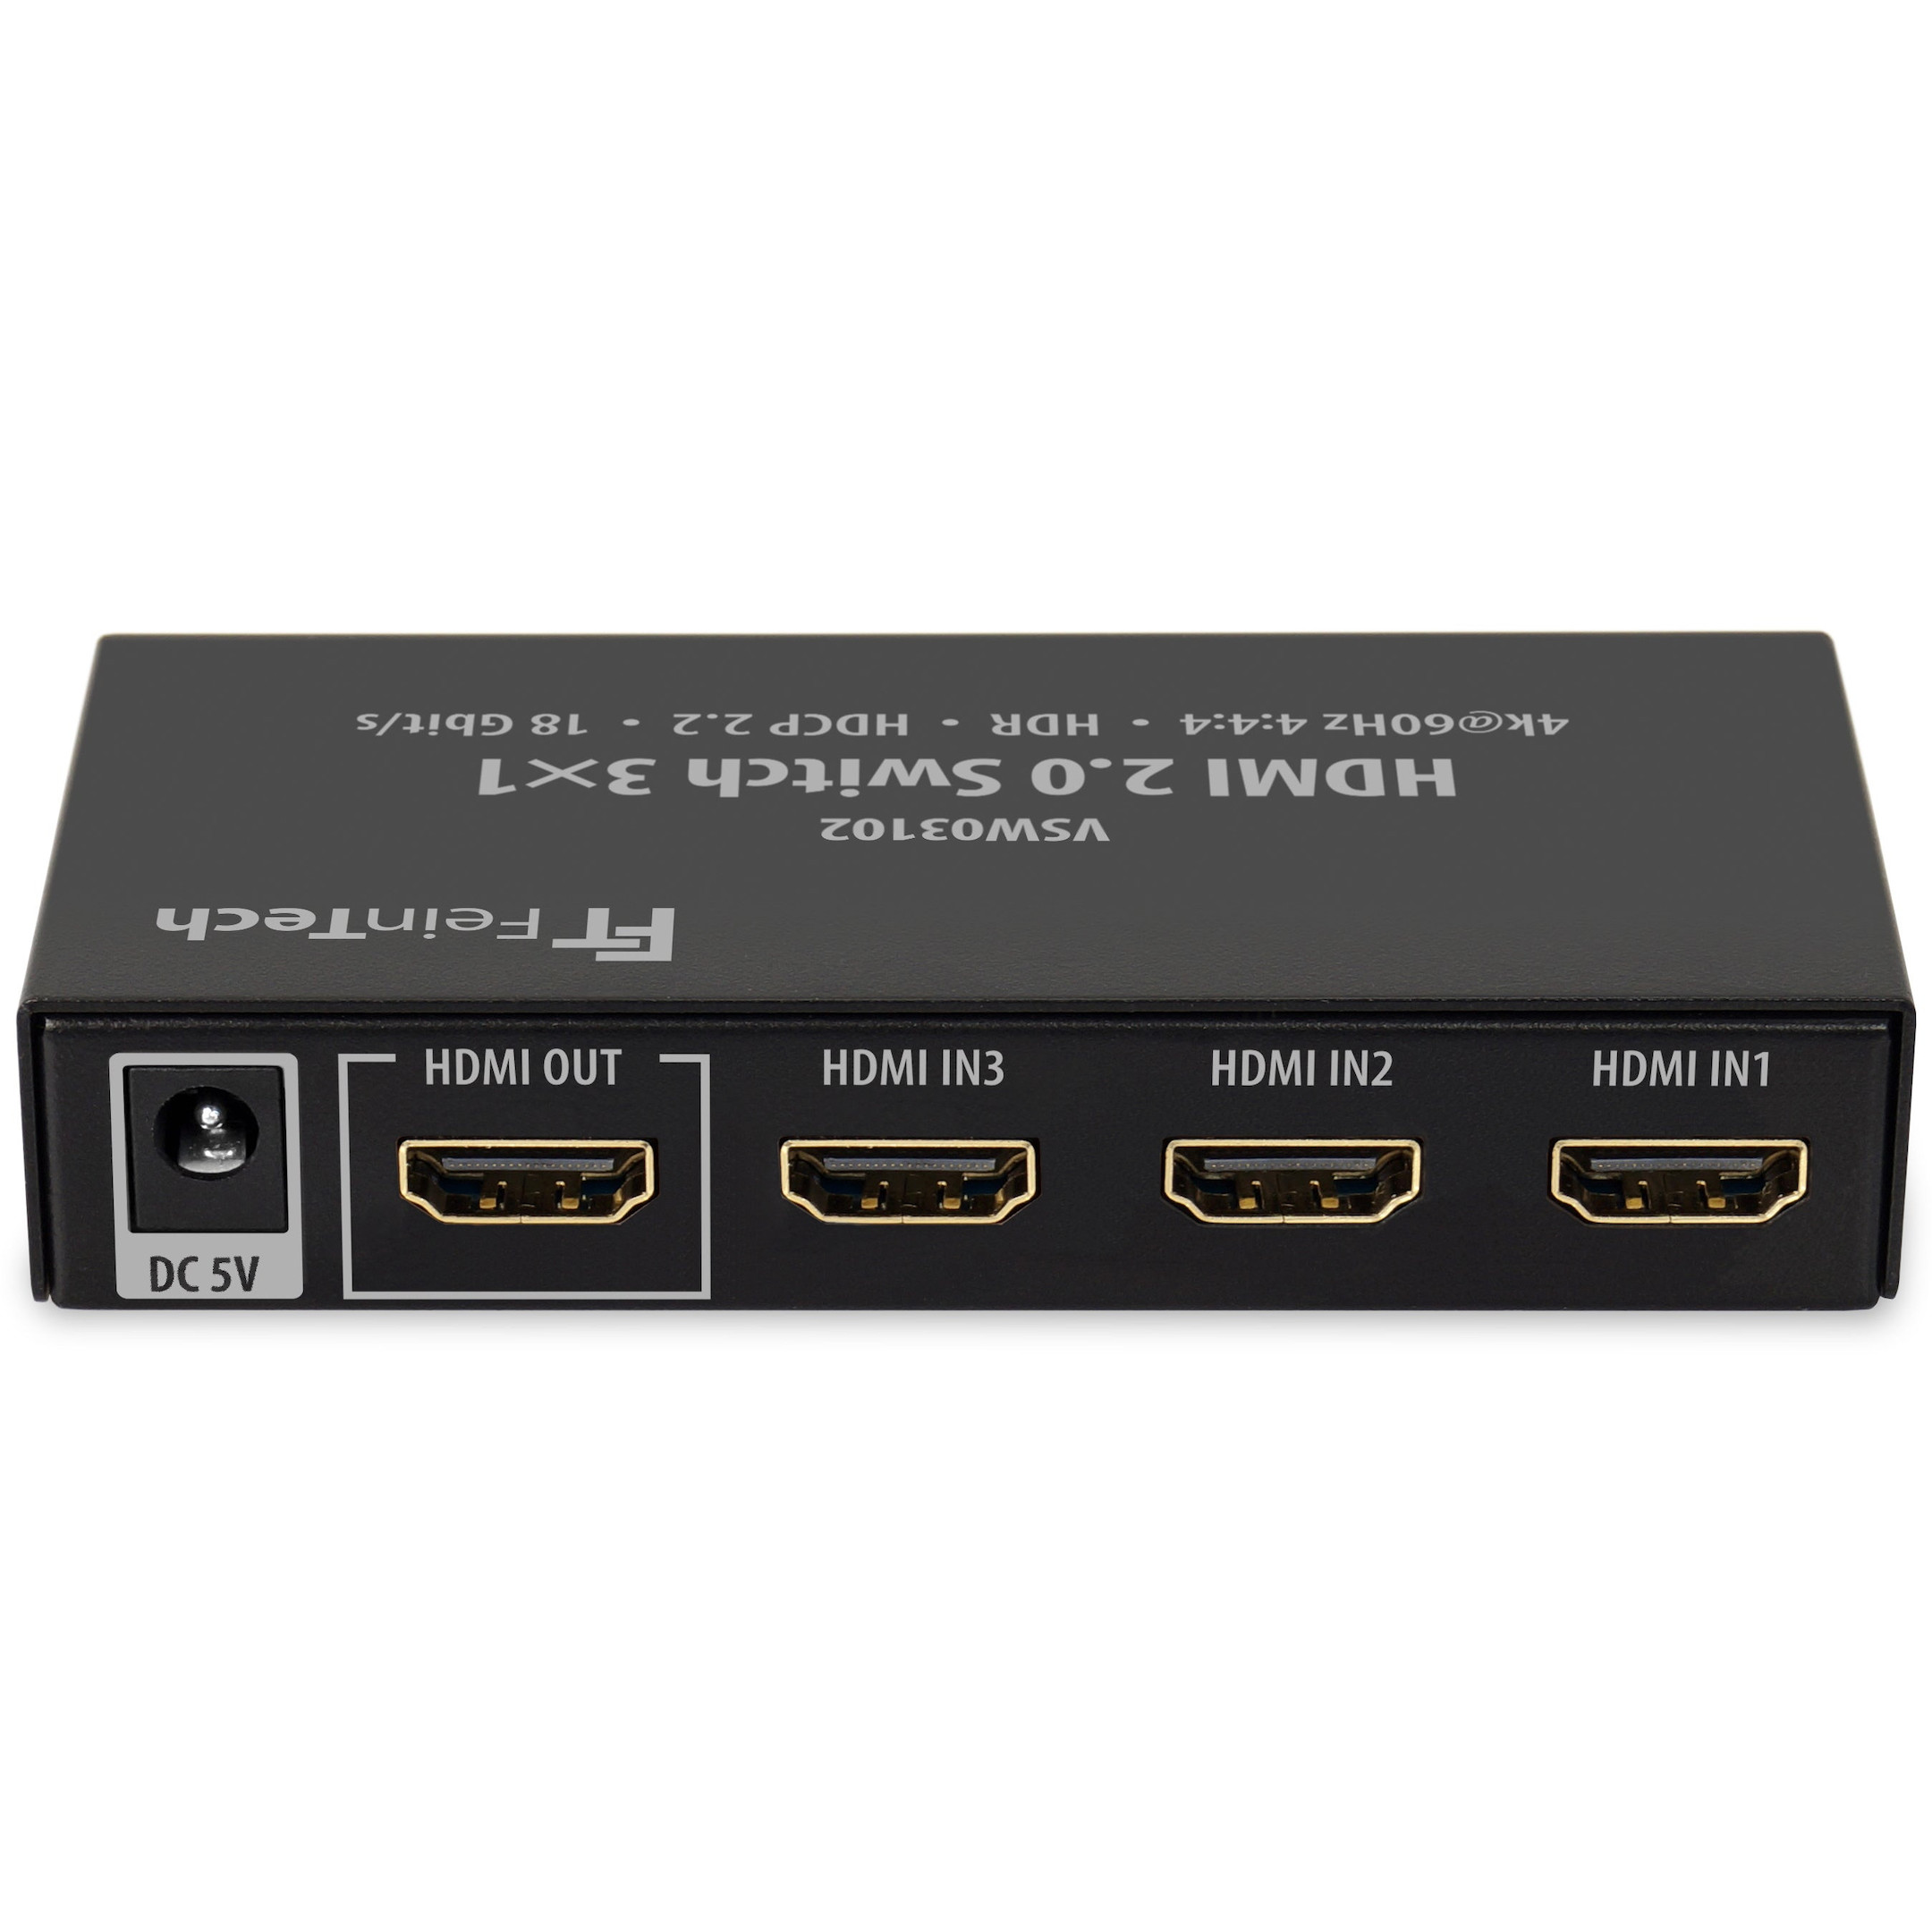 feintech-vsw03102-hdmi-switch-3-in-1-out-4k-60hz-auto-switching